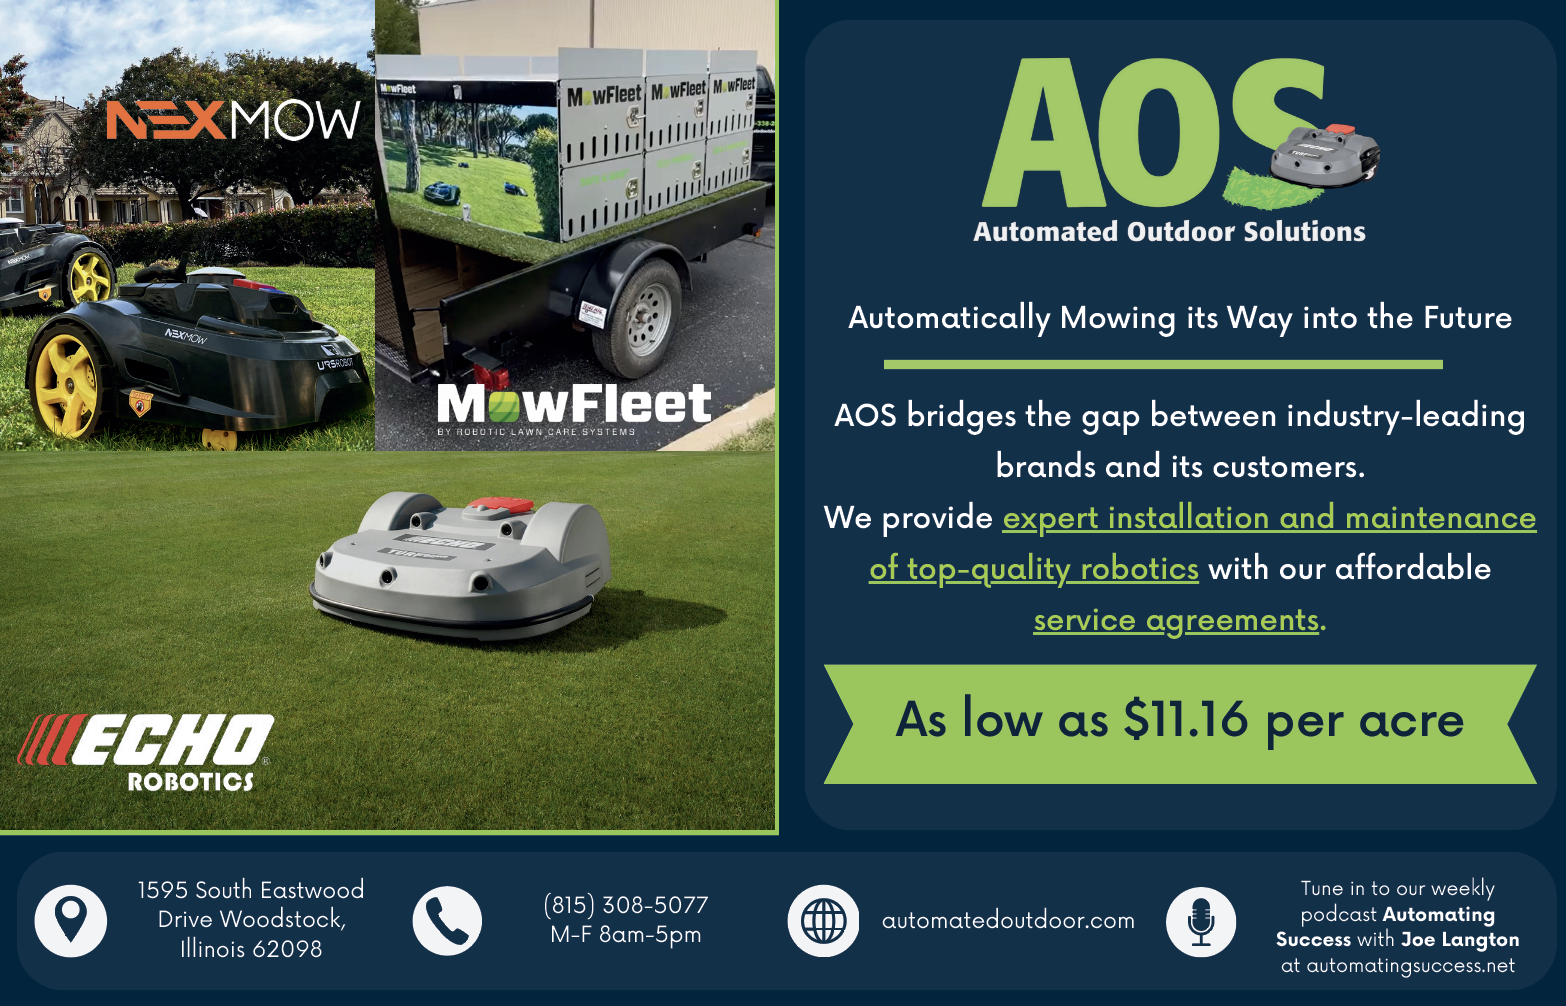 Automated Outdoor Solutions, Automatically Mowing its Way into the Future